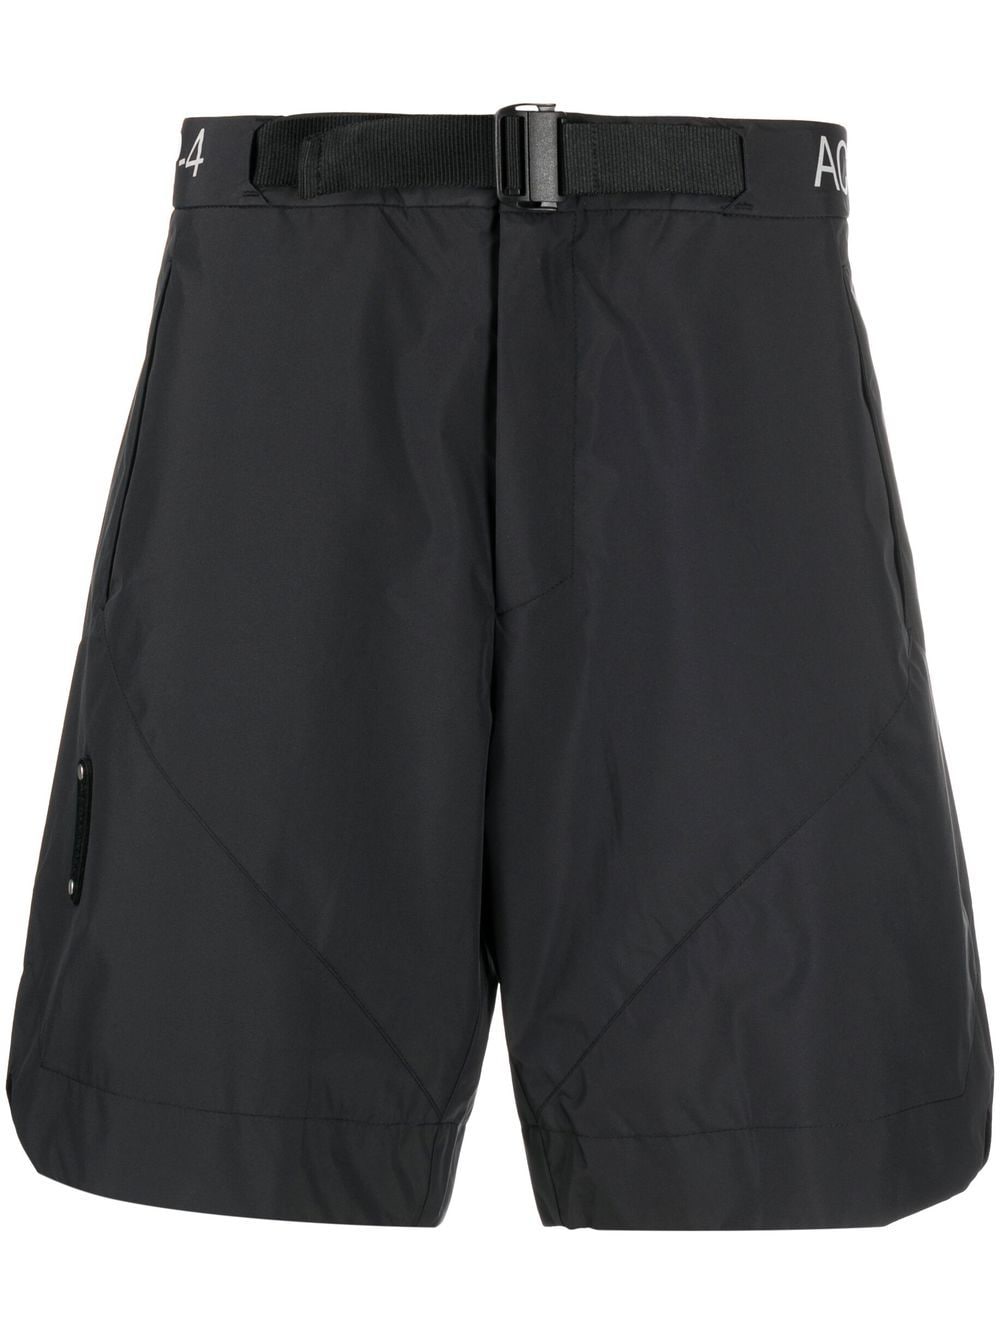 A-COLD-WALL* Nephin belted Bermuda shorts - Black